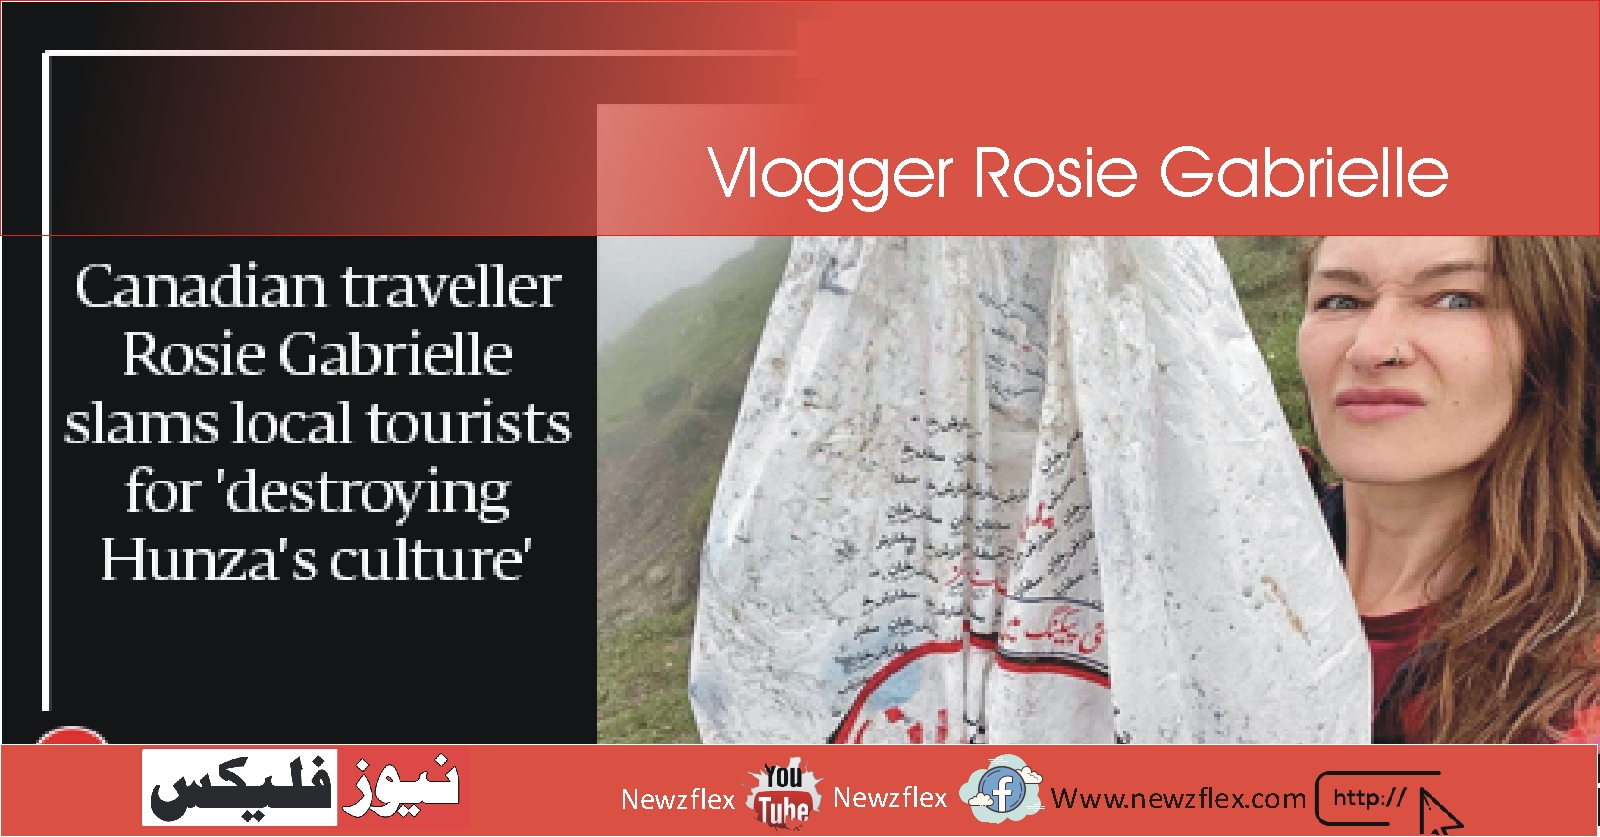 Vlogger Rosie Gabrielle says city tourists ‘spreading vulgarity, destroying Hunza’s culture’